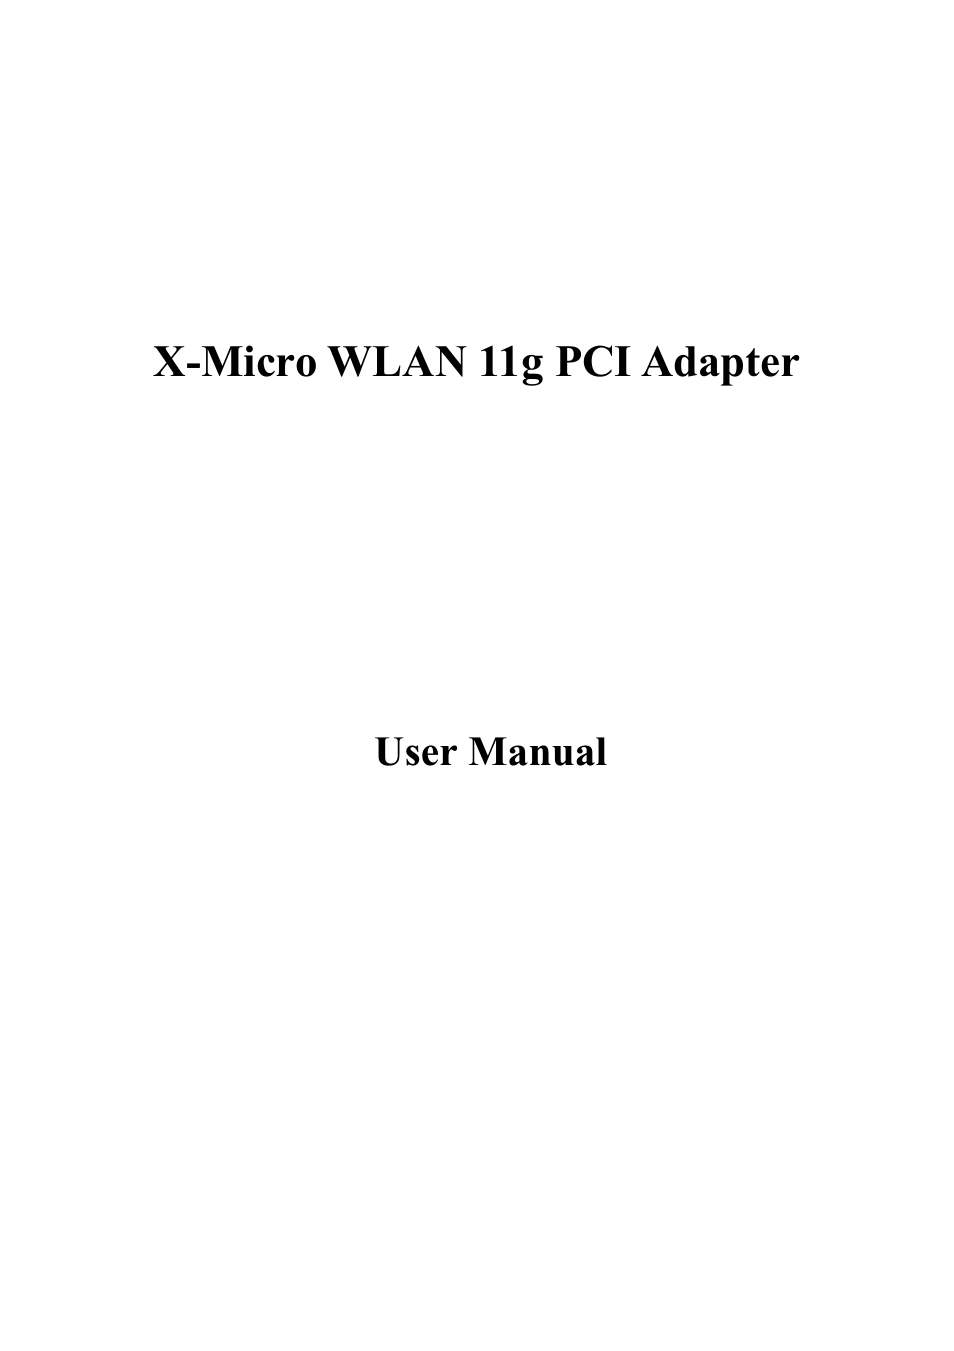 X-Micro Tech. PCI Adapter fxmicro User Manual | 23 pages